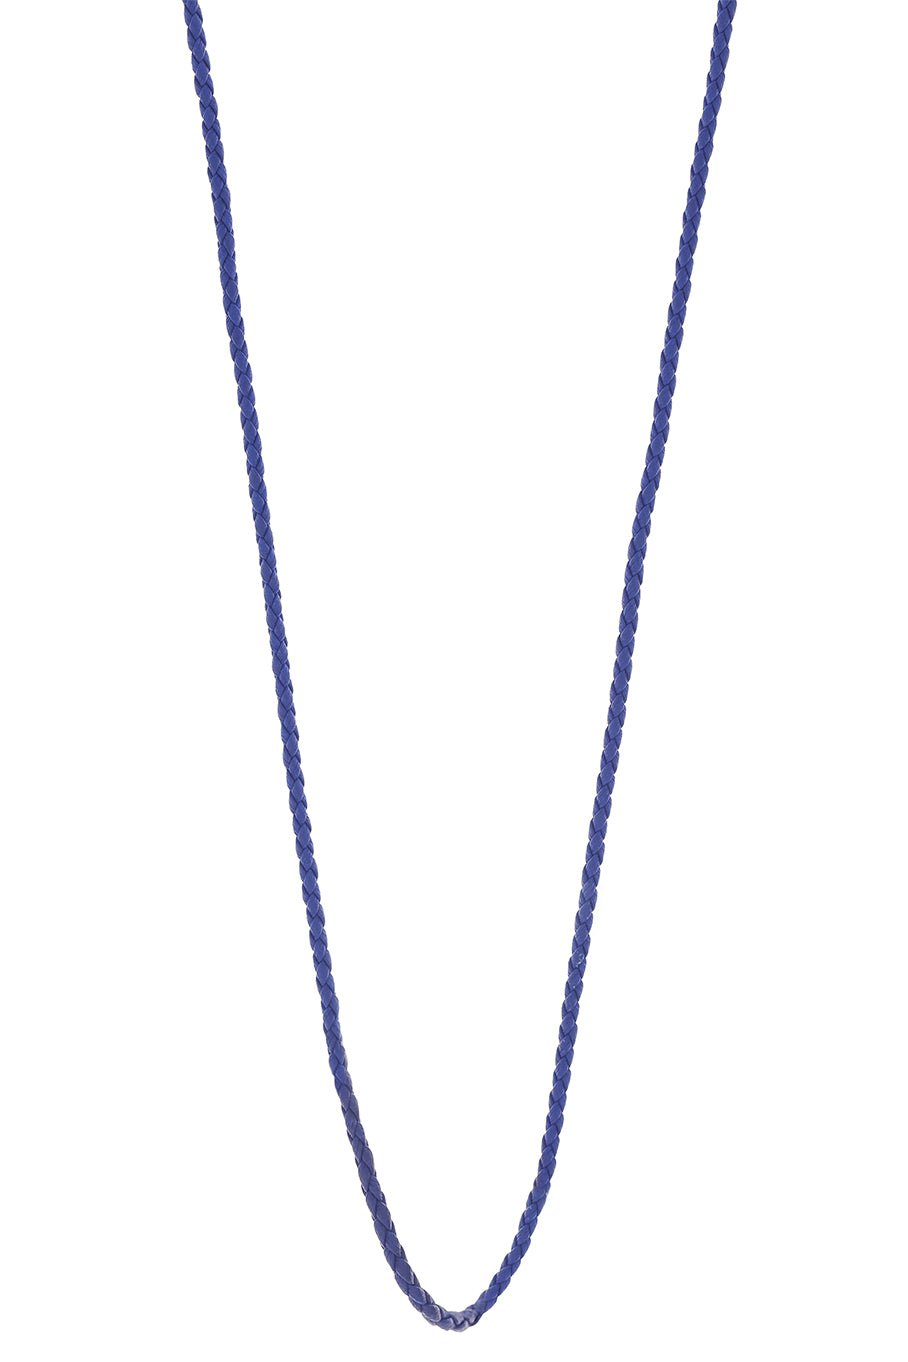 BUDDHA MAMA-Faux Leather Cord Necklace - Blue-YELLOW GOLD